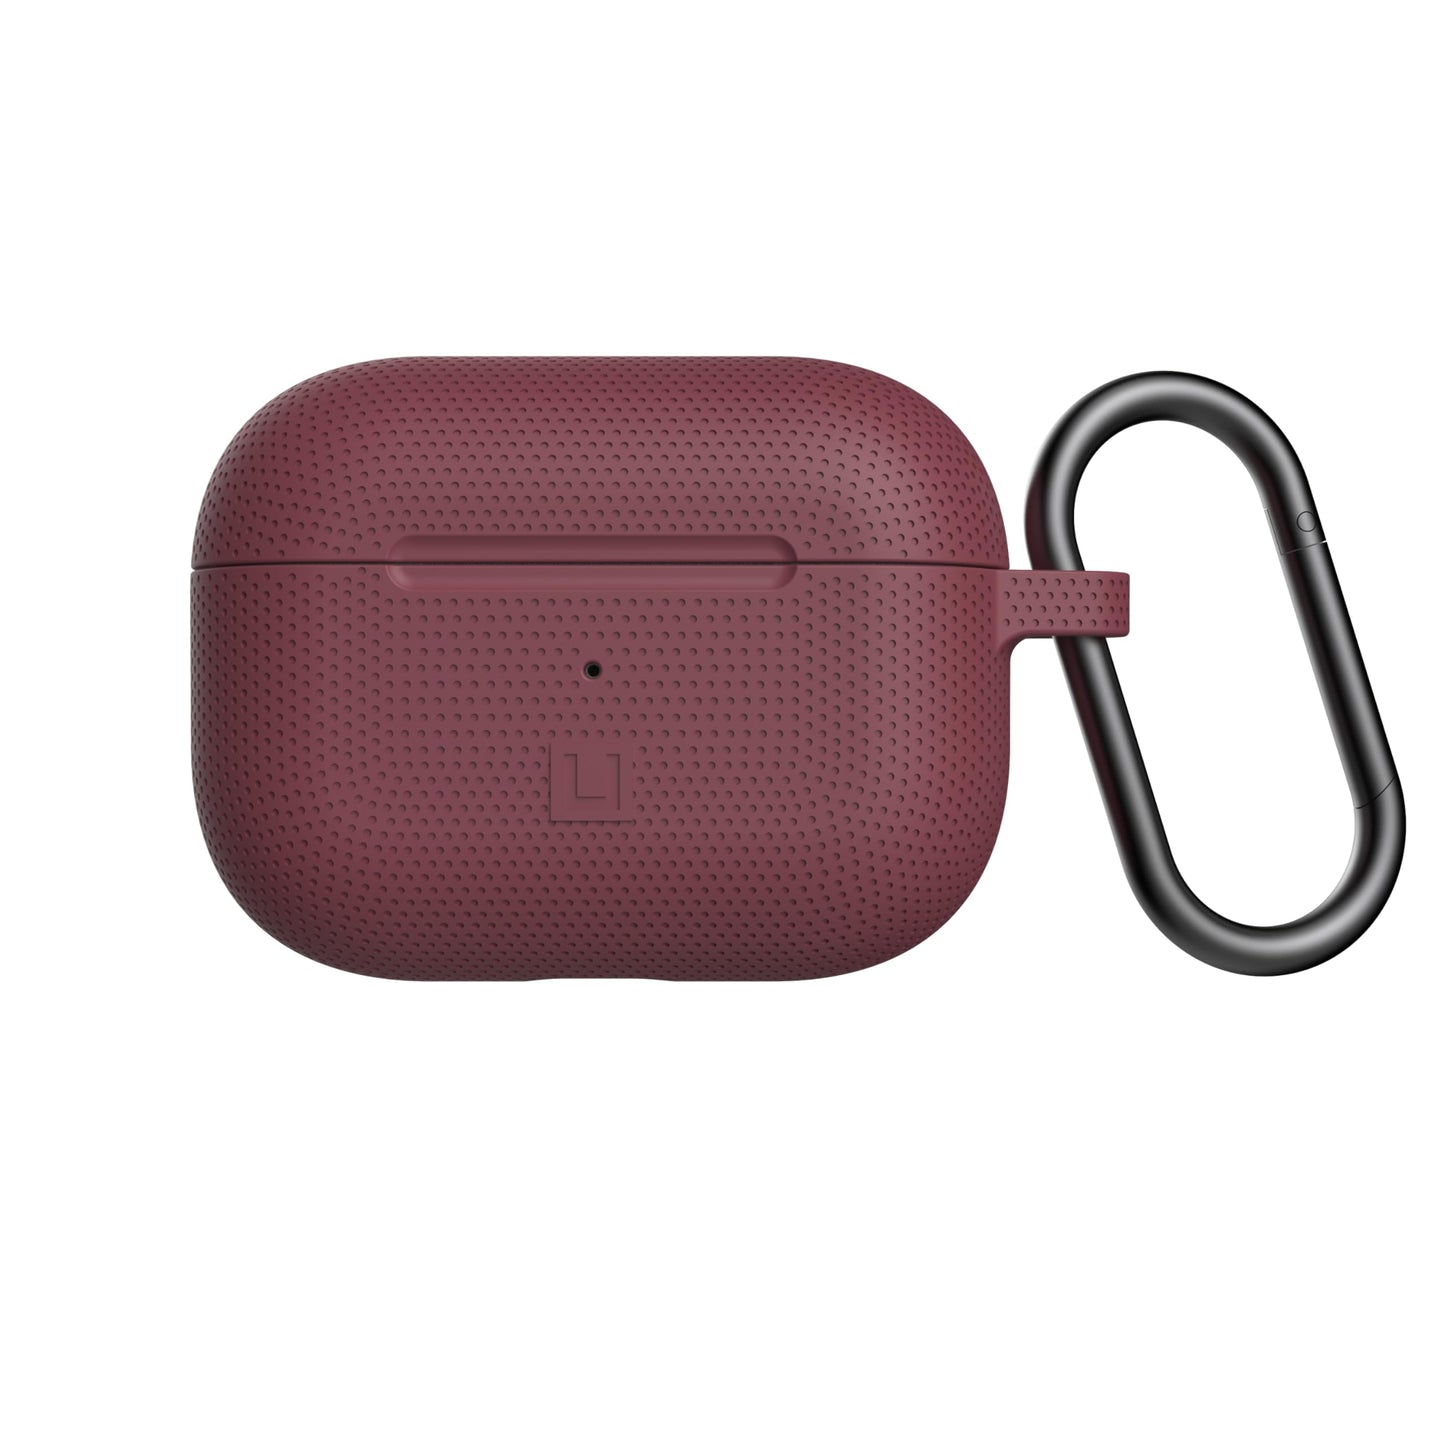 [U] by UAG Compatibile with AirPod Pro Case Soft Smooth Silicone Stylish Dot Pattern Protective Cover with Carabiner Keychain, Aubergine